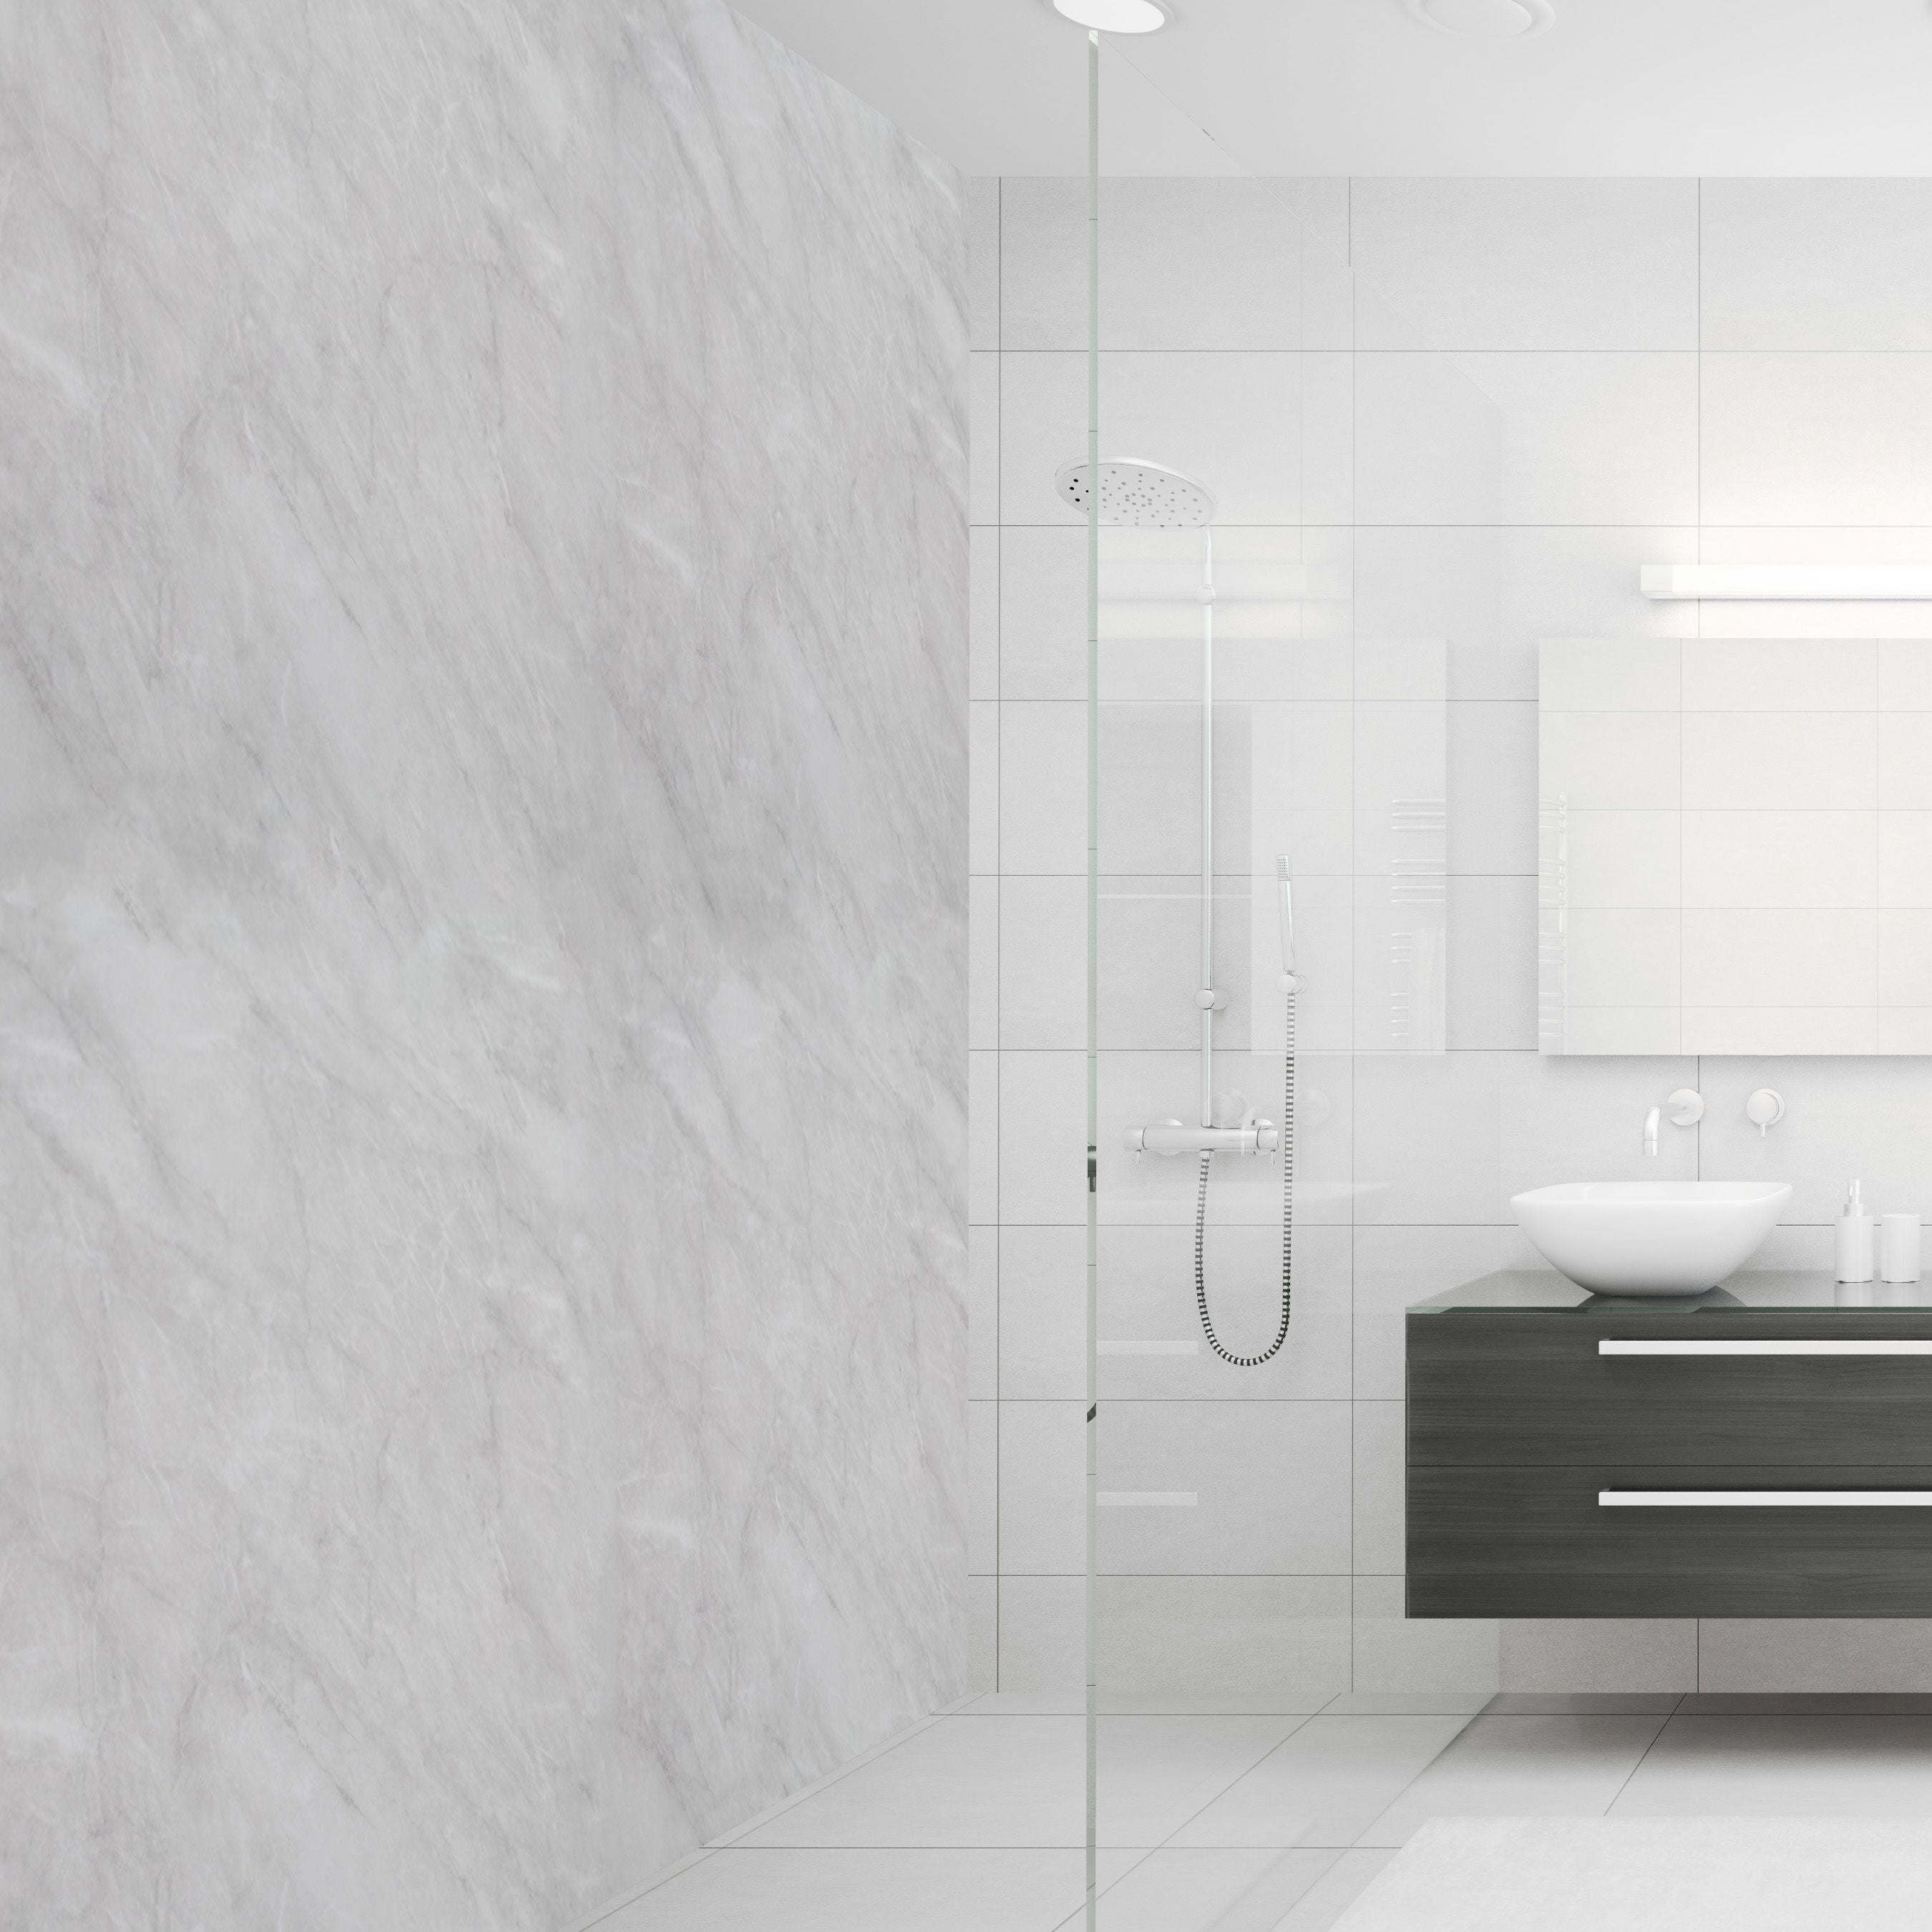 Claddtech’s branded Marble Wall Panels contain an exclusive range of simple yet stunning designs, with plenty to choose from.